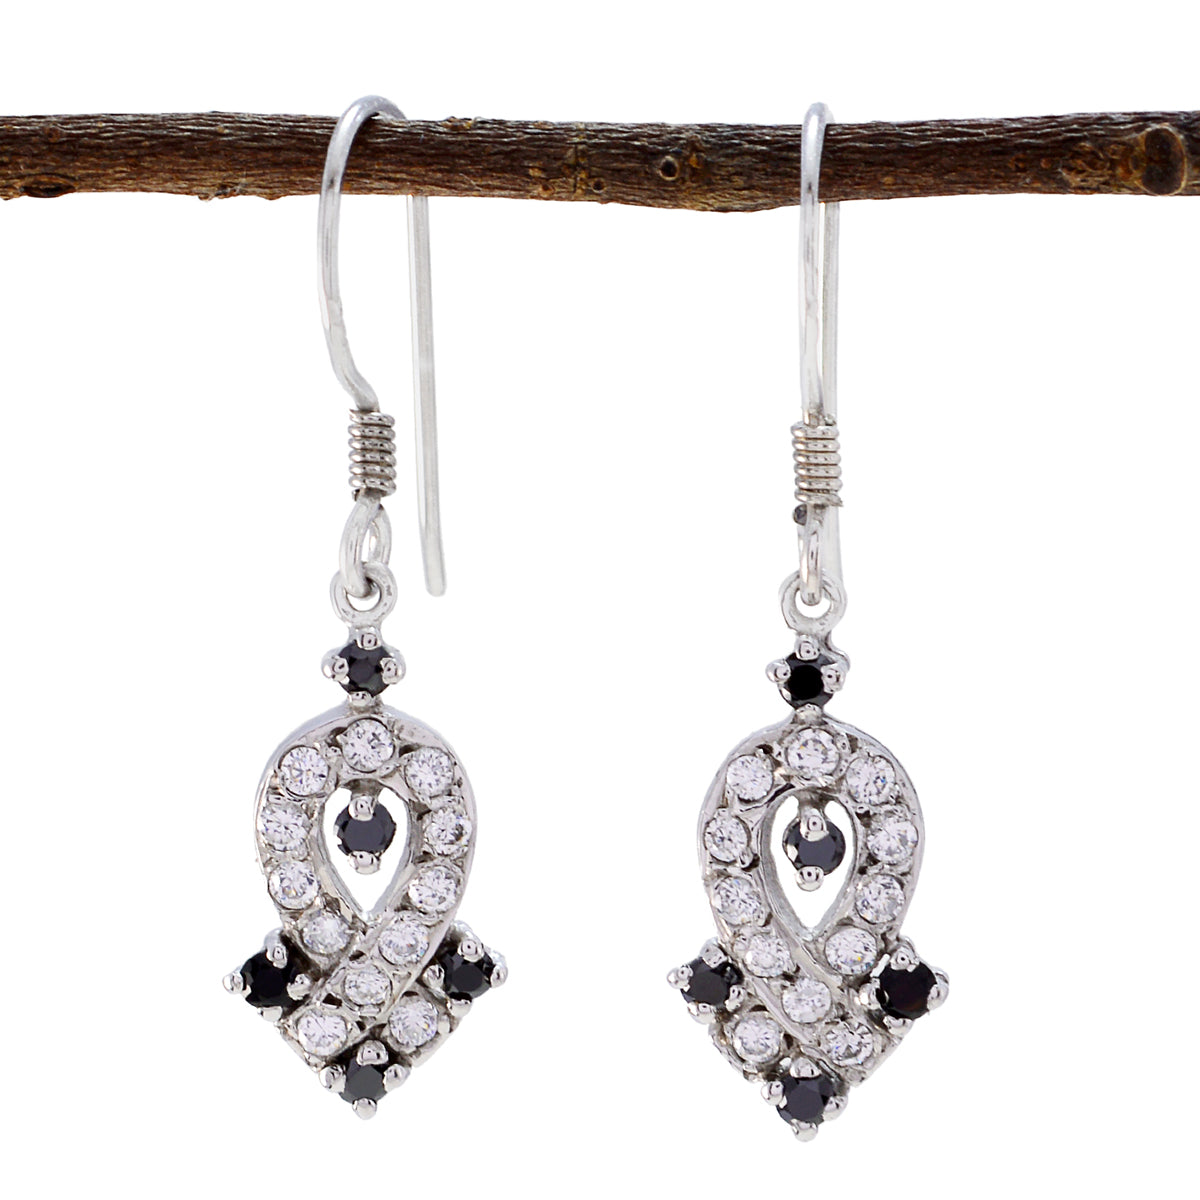 Riyo Genuine Gems round Faceted Multi Multi CZ Silver Earring gift for anniversary